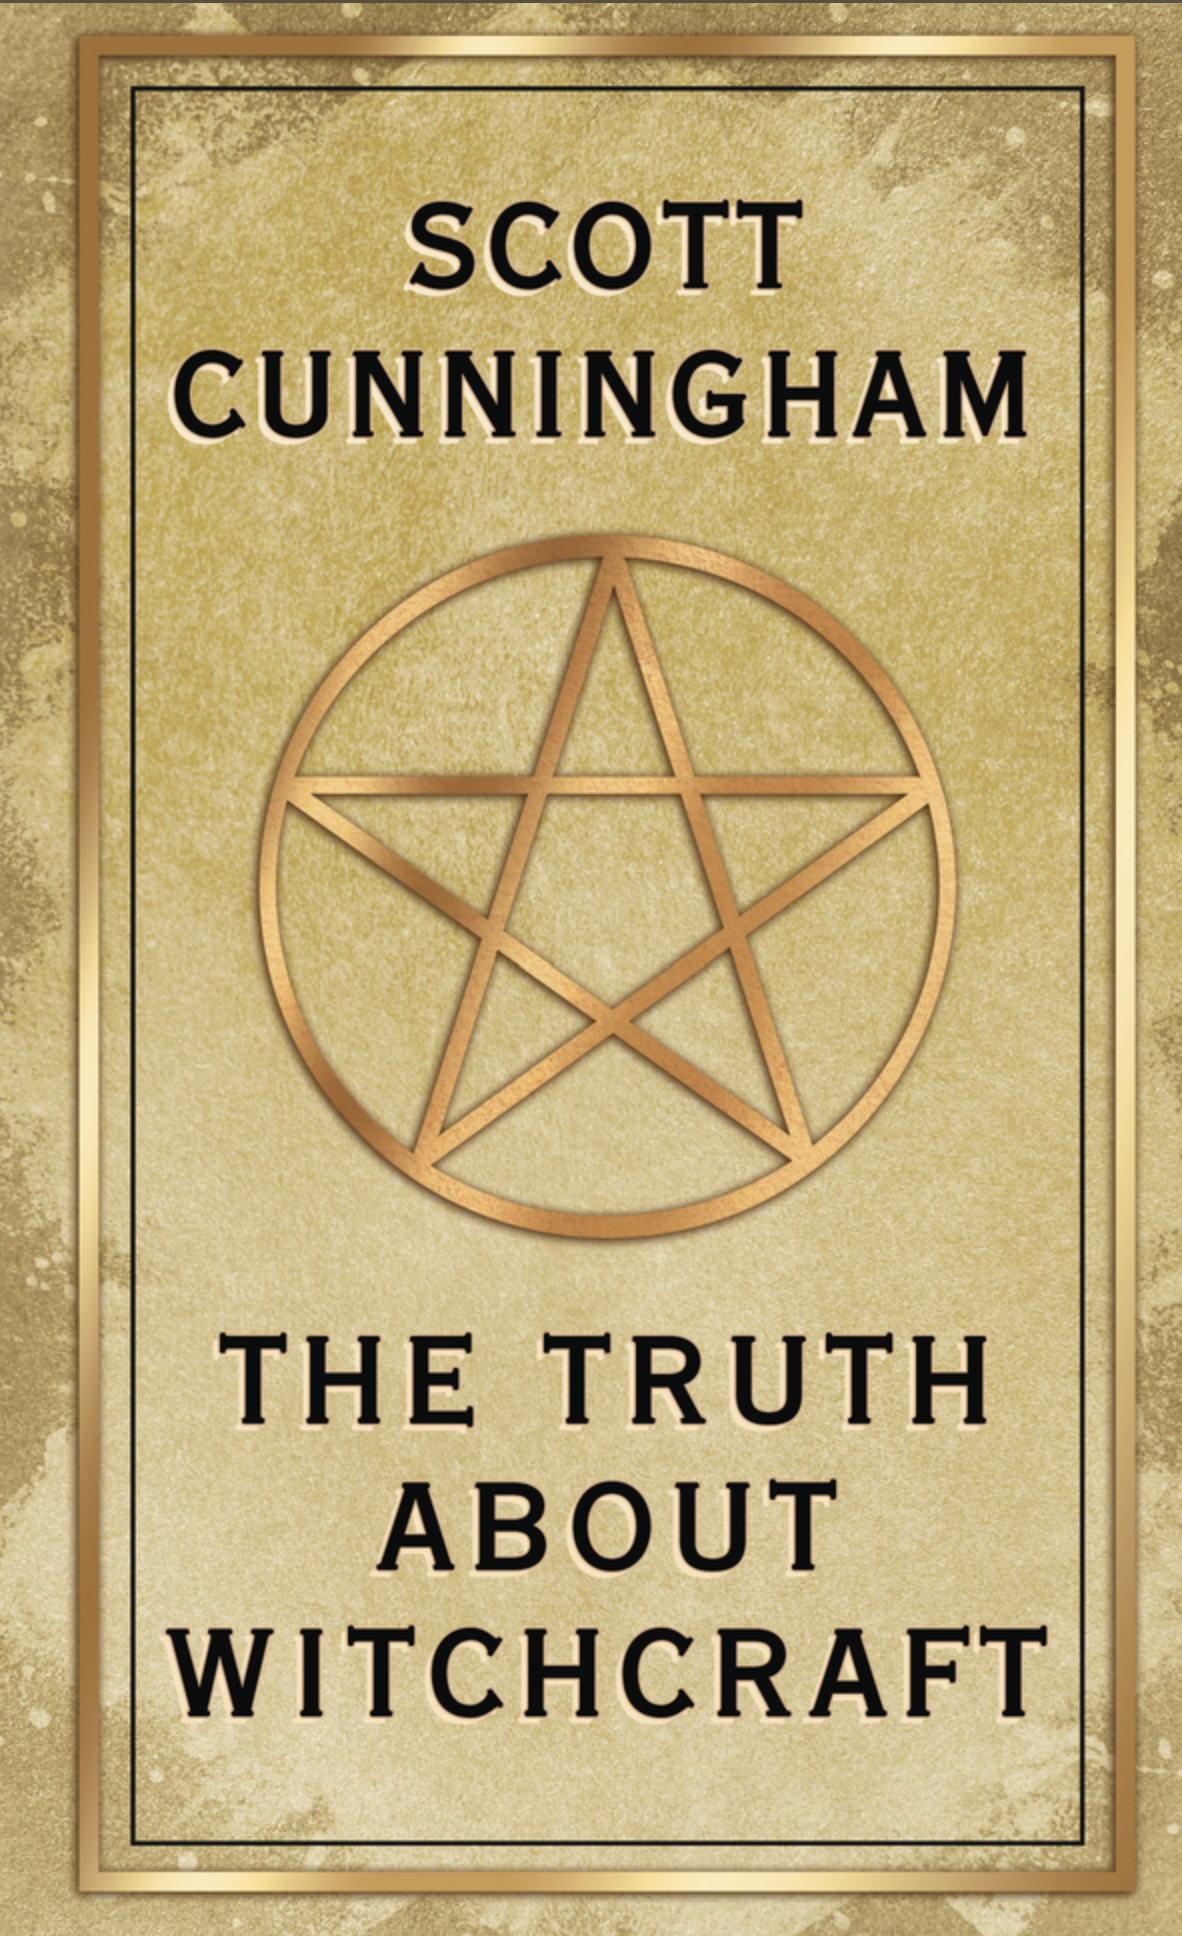 the truth about witchcraft by Scott Cunningham